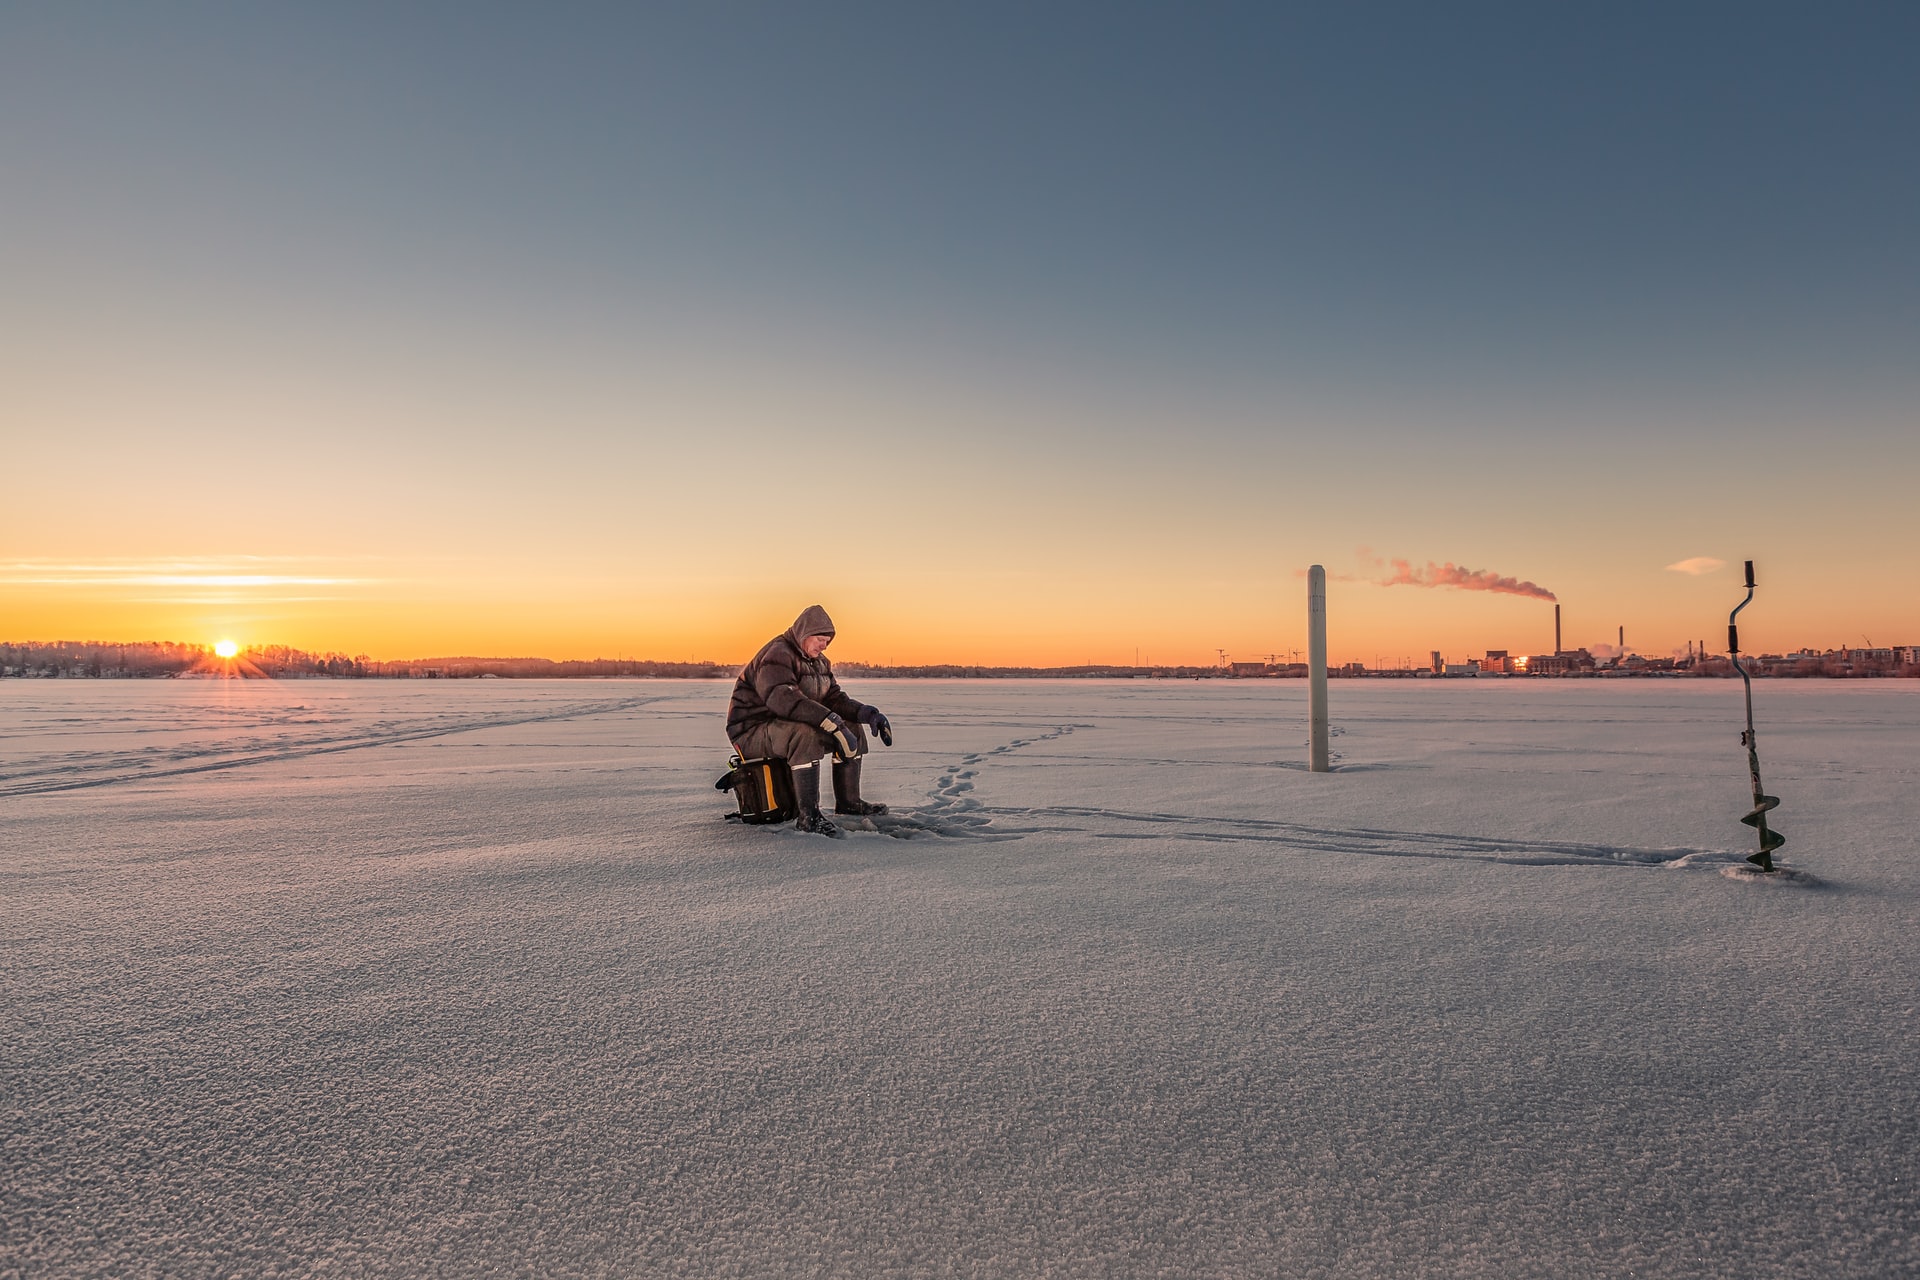 Image of ice fisher all alone—Photo by Carlos "Grury" Santos on Unsplash